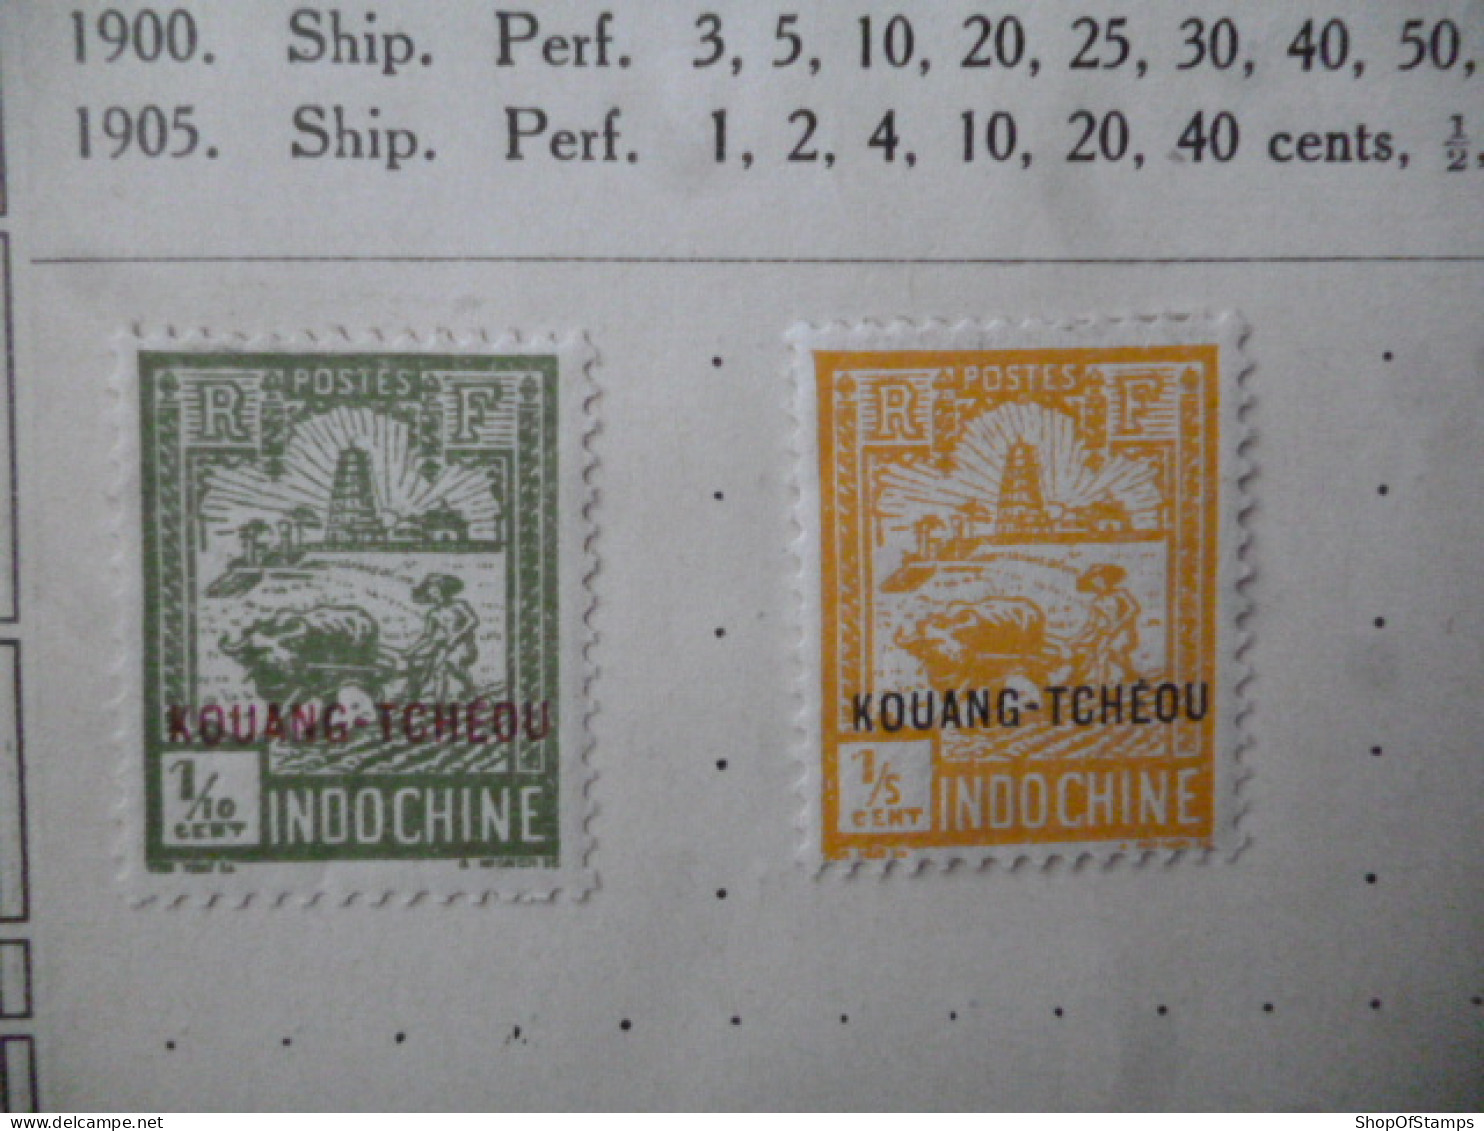 KOUANG-TCHEOU OLD FINE USED/POSTMARK AS PER SCAN - Used Stamps